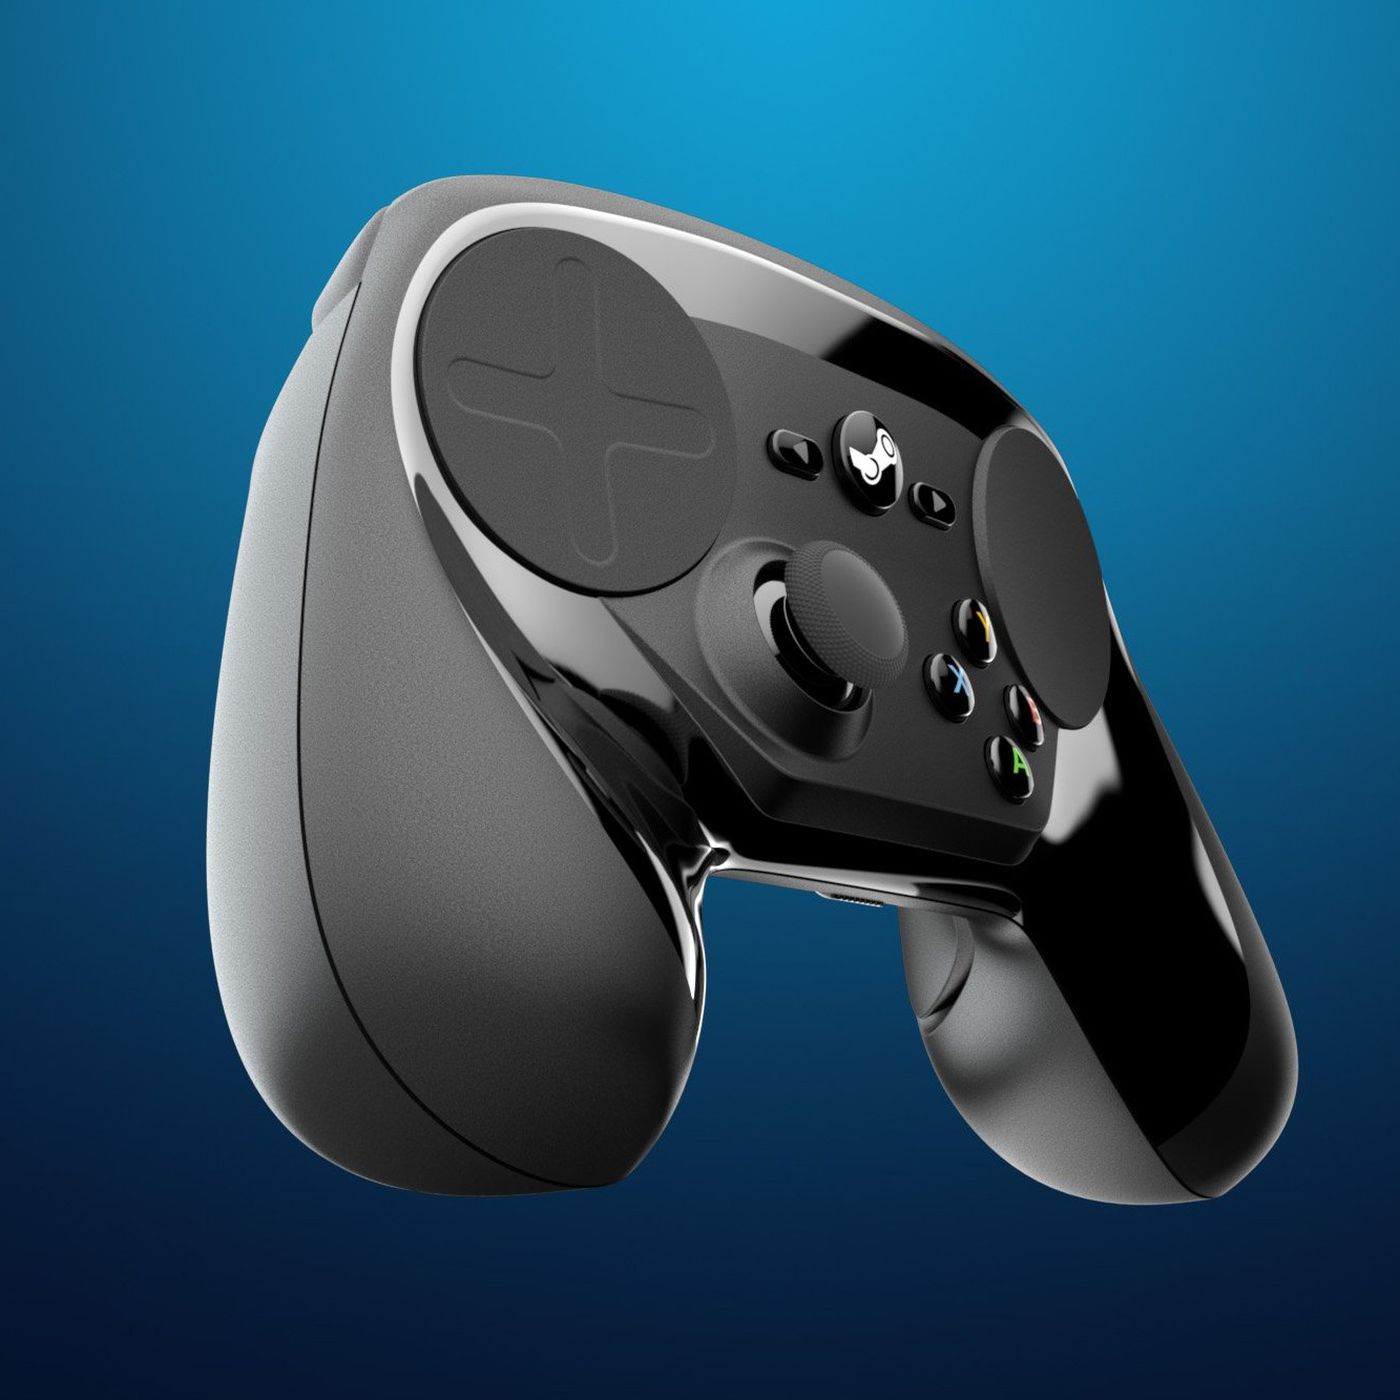 Pour one out for the Steam Controller, sold out forever after $5 